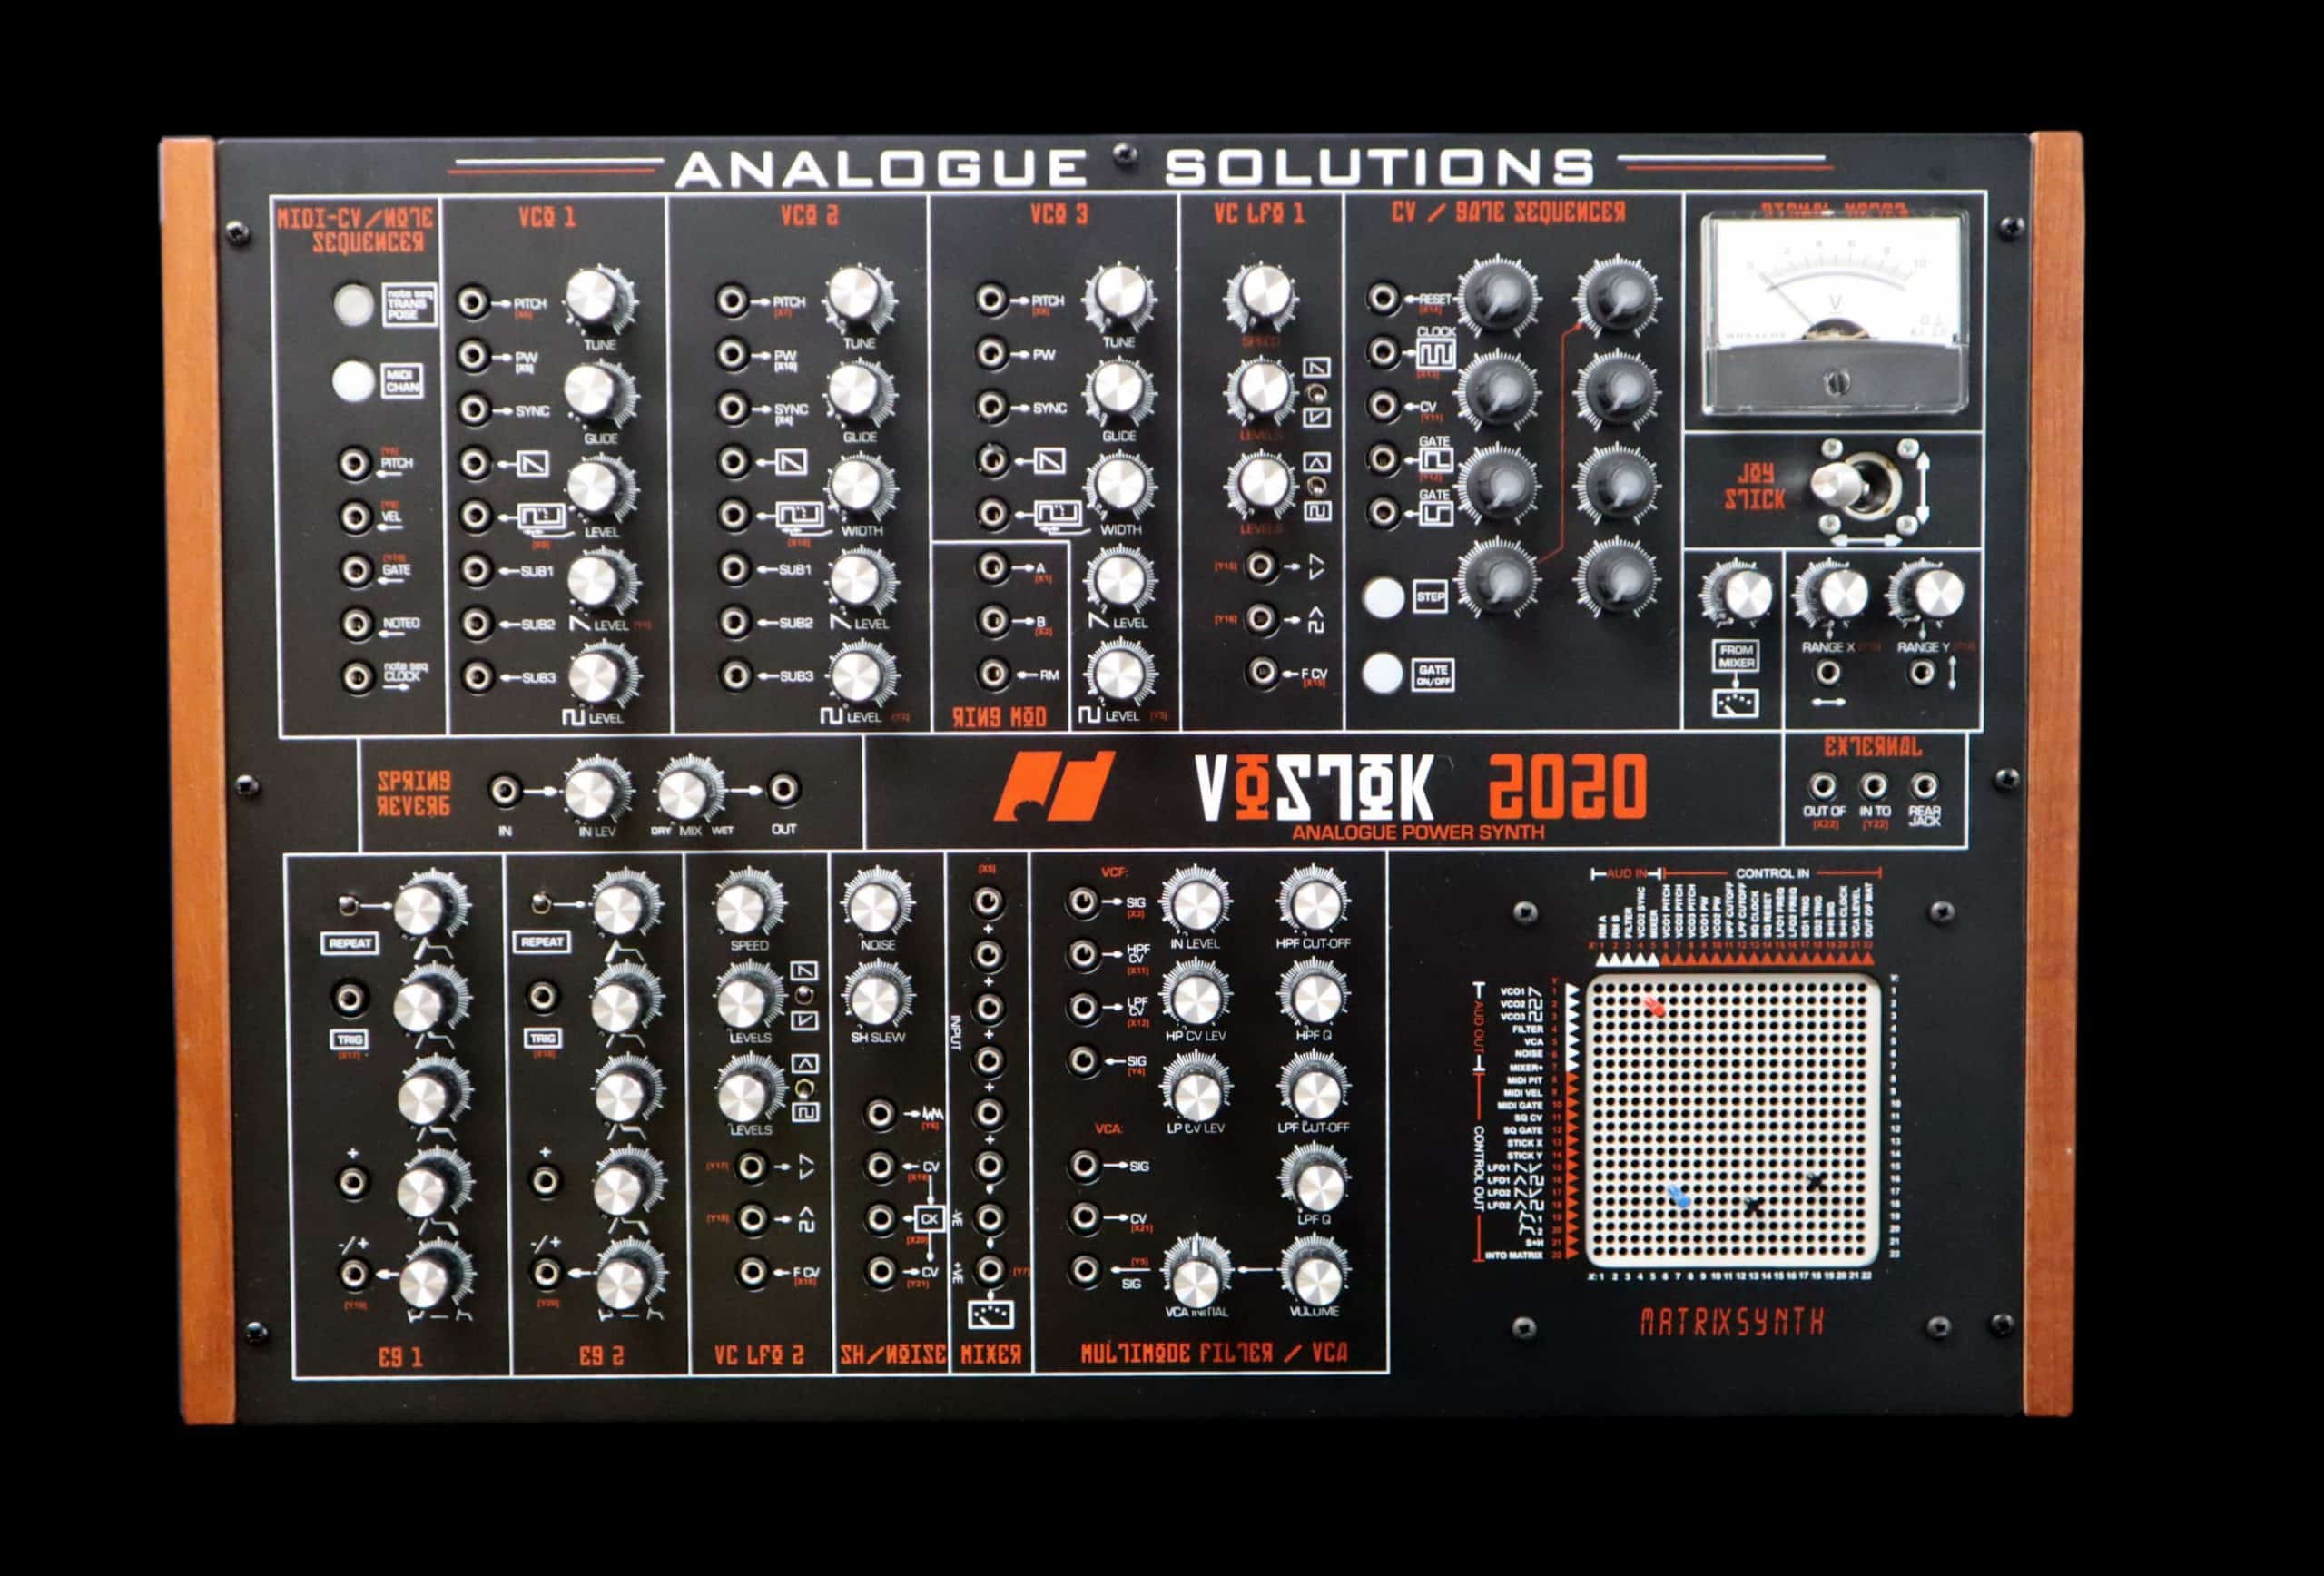 Vostok2020 an Analogue Power Synth